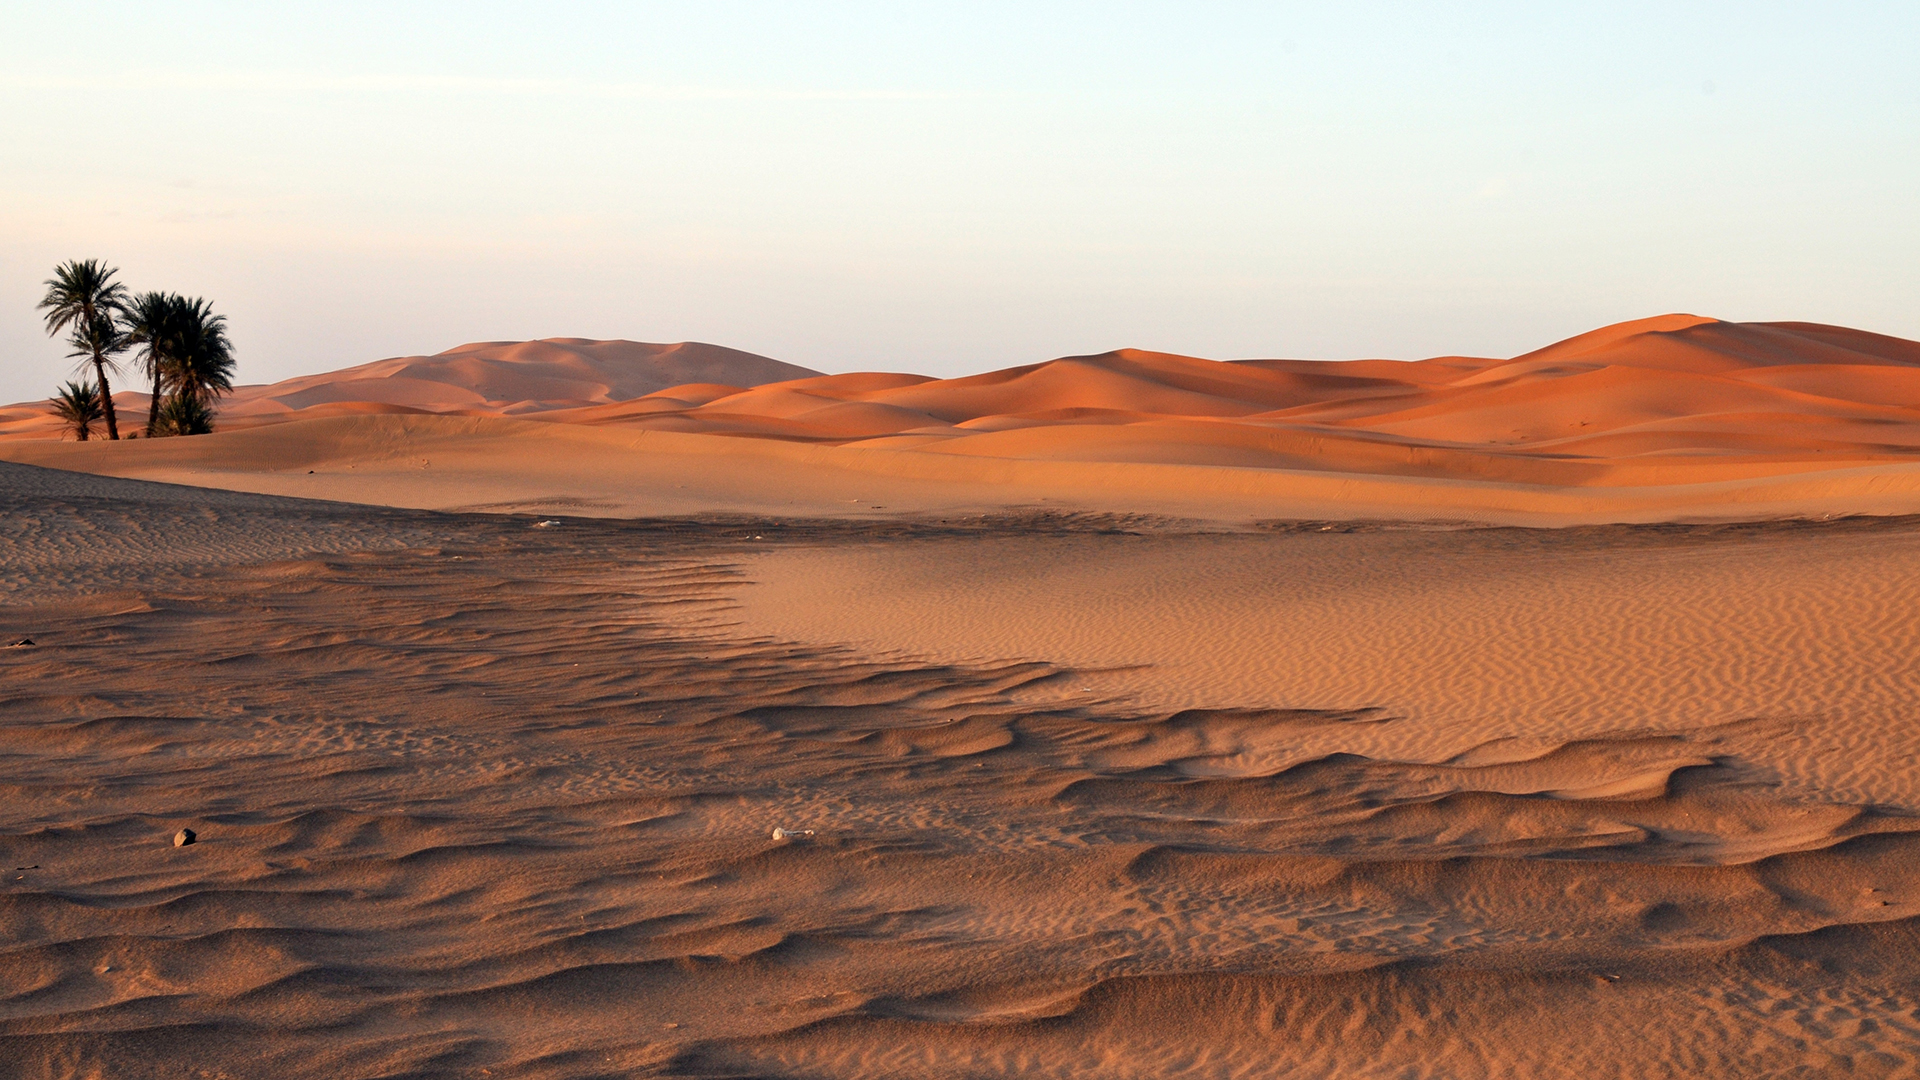 The Sahara: Earth's largest hot desert | Live Science